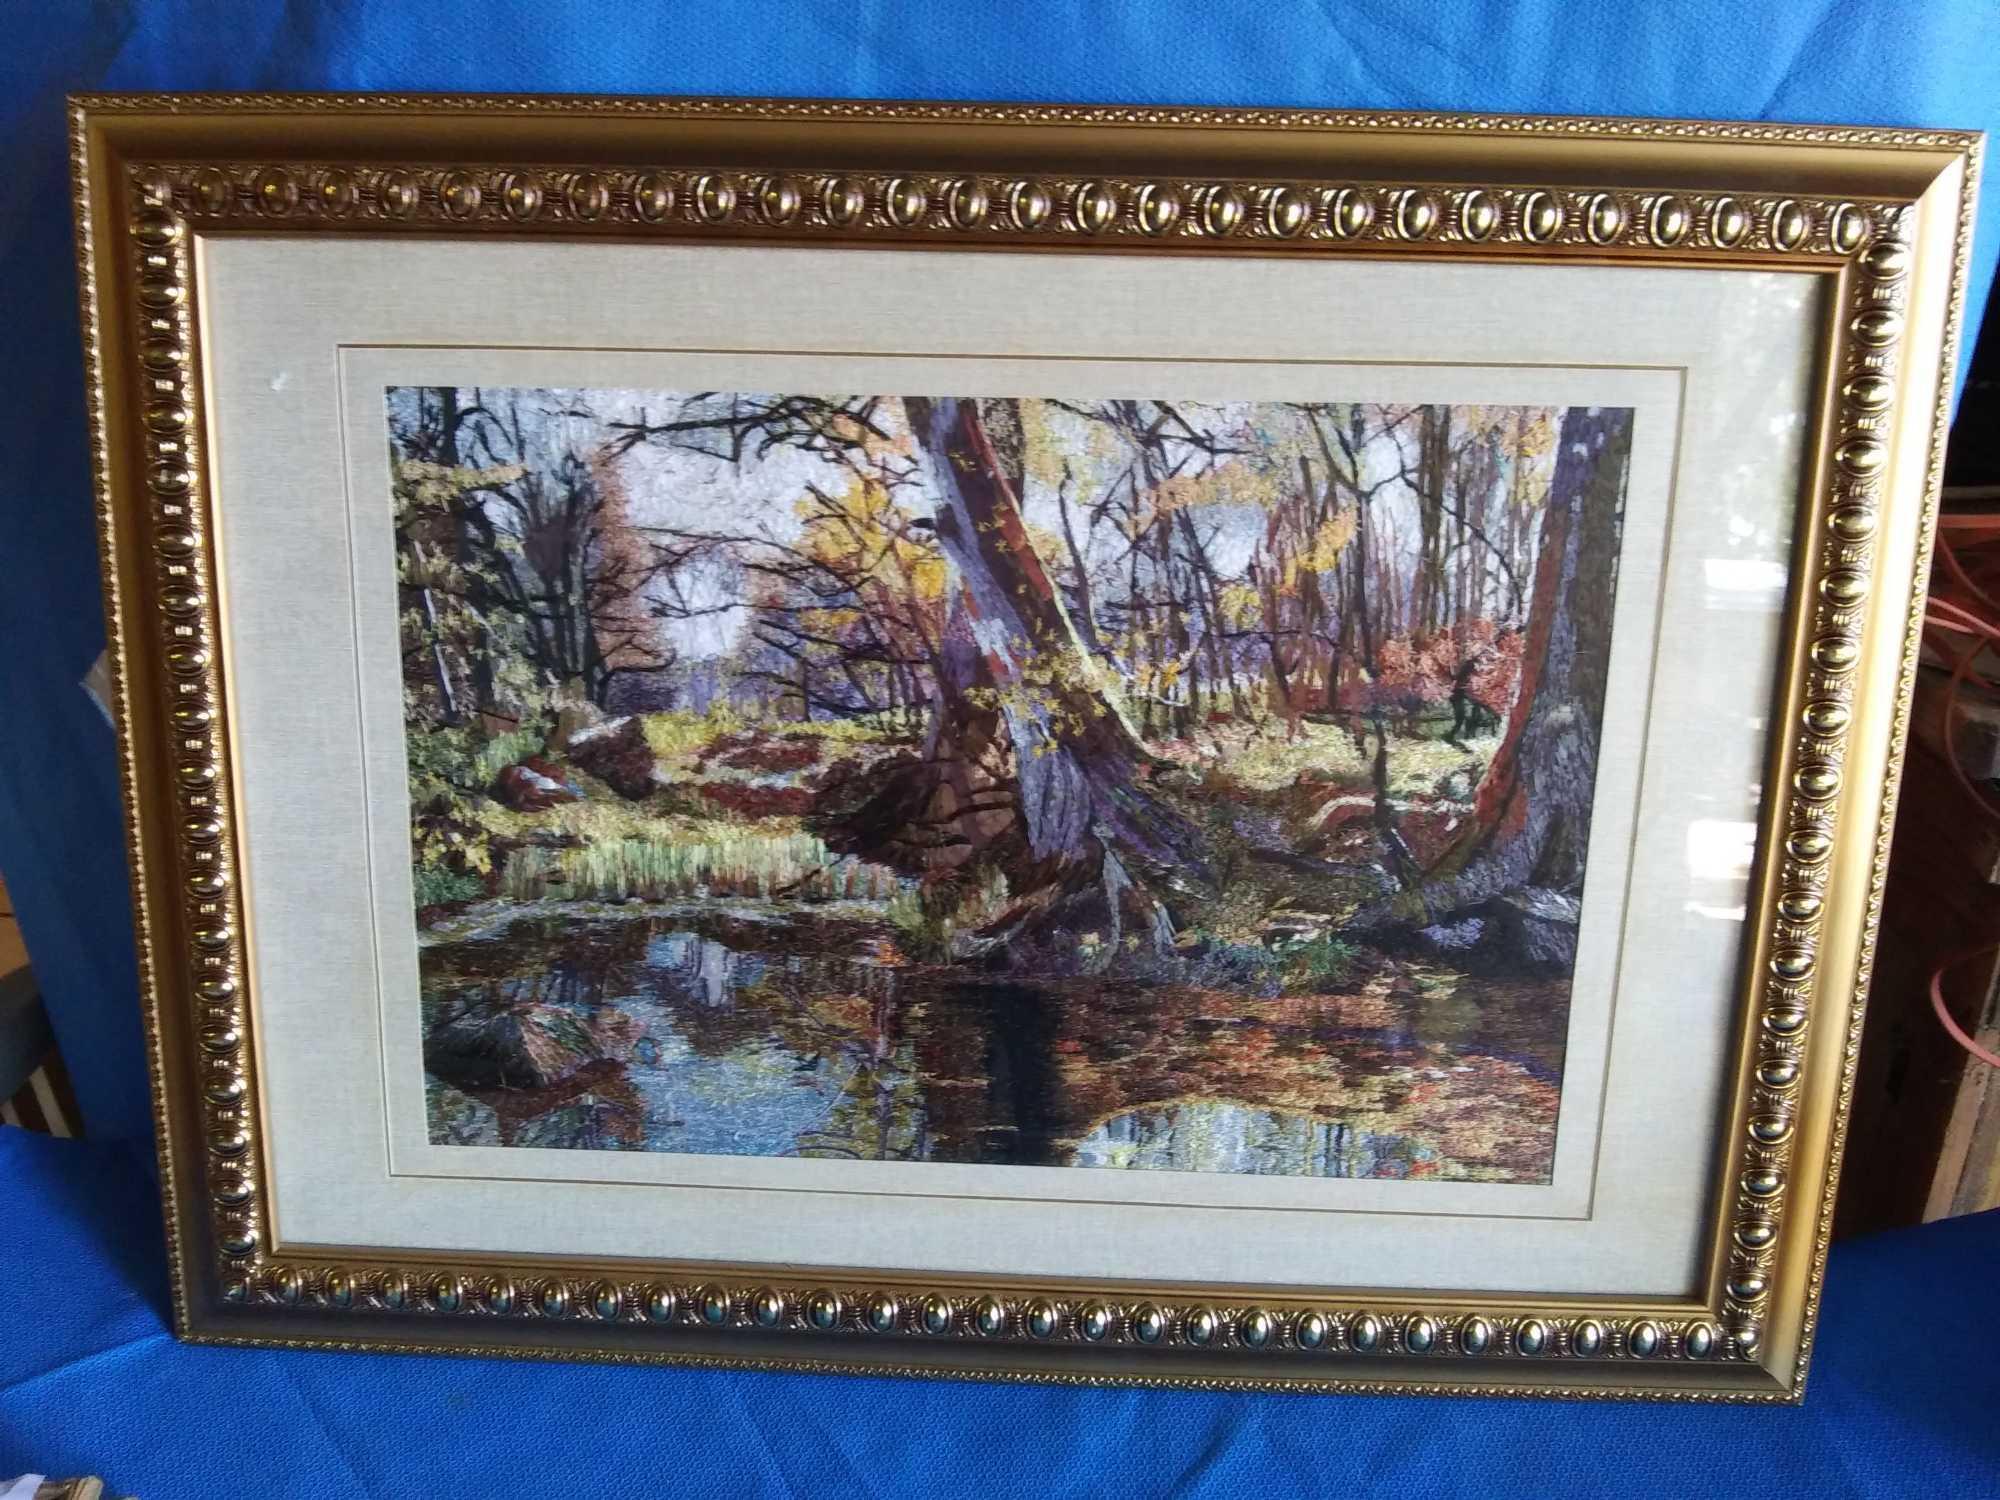 Gorgeous Chinese silk Embroidery Painting, Gleaming Golden Framed and Matted Professionally